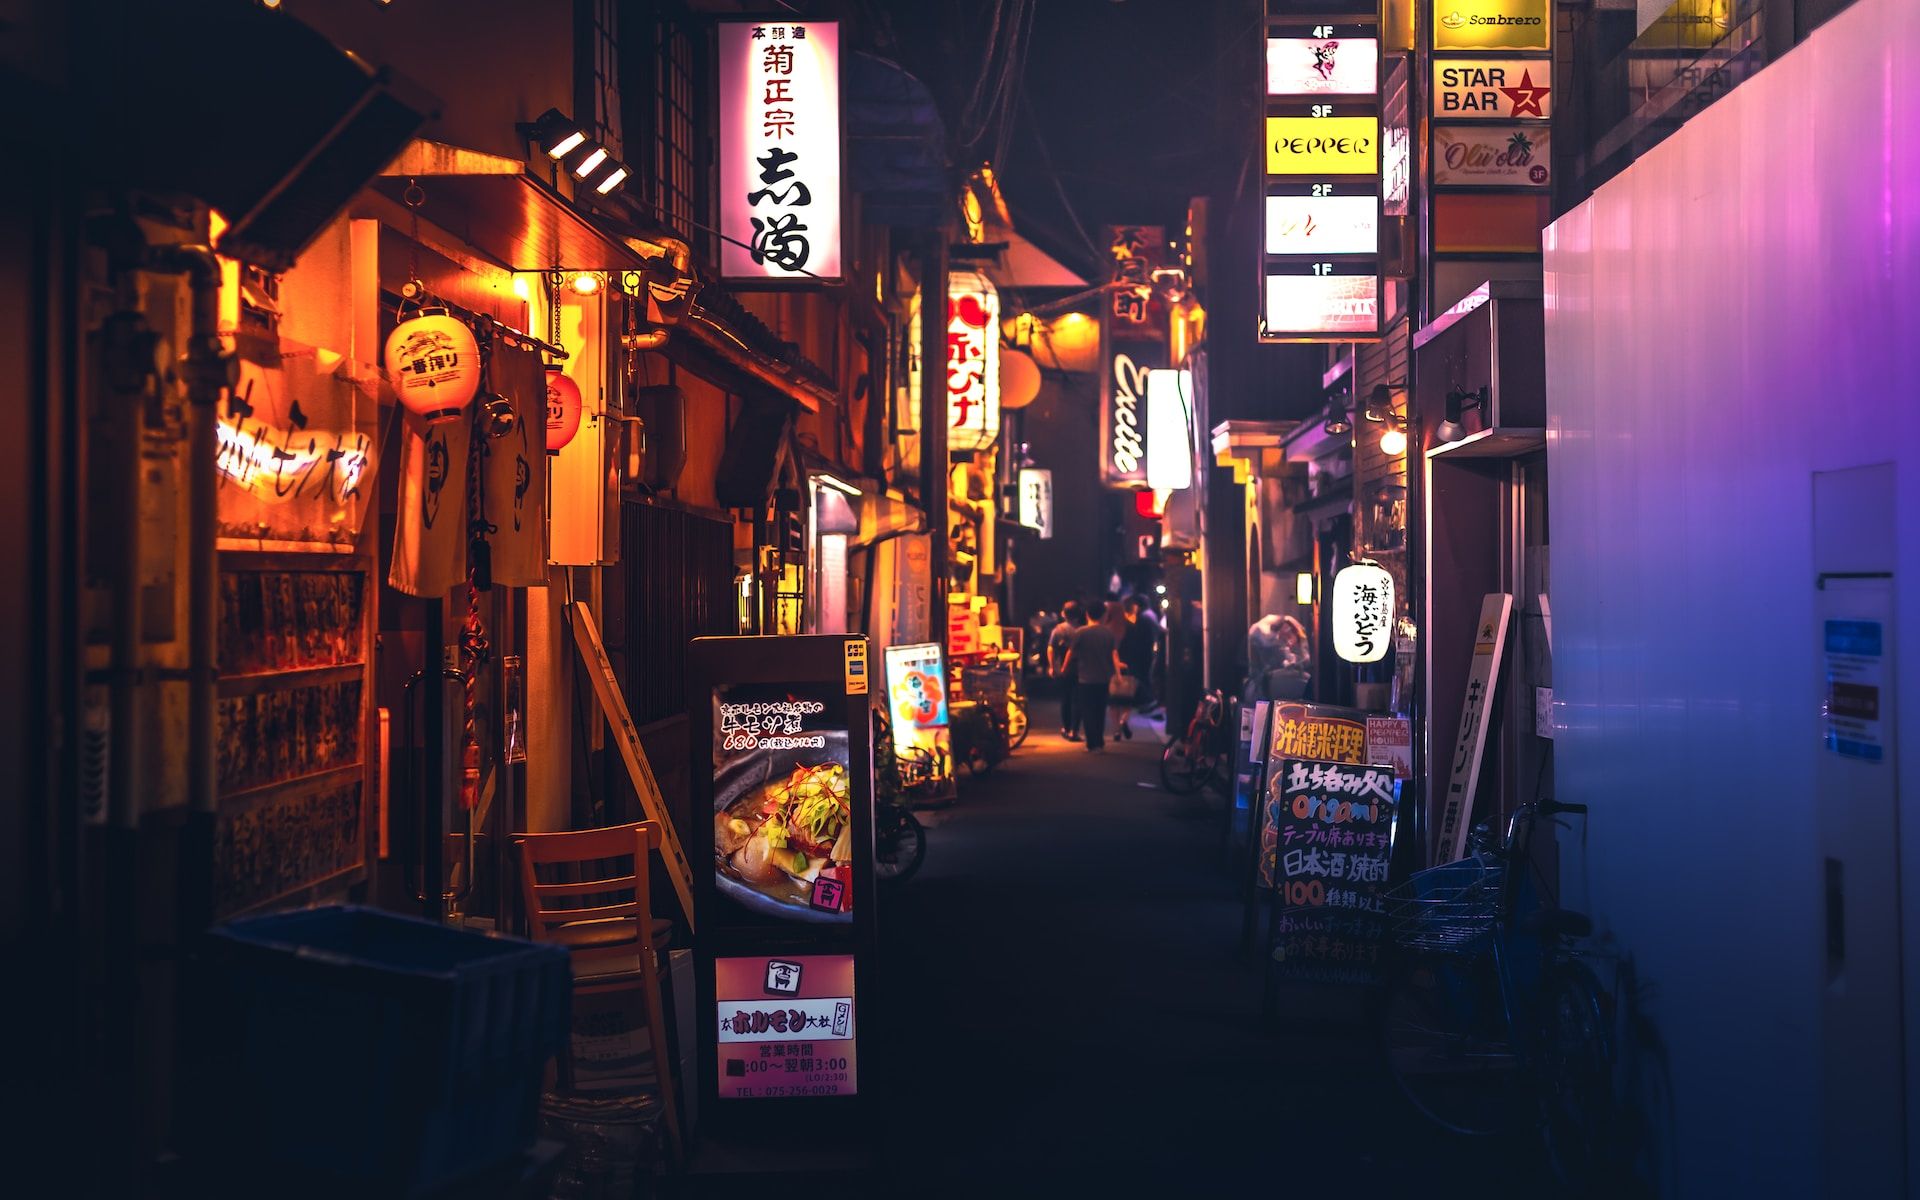 A more modern area of Kyoto illuminated with advertisements, Japan